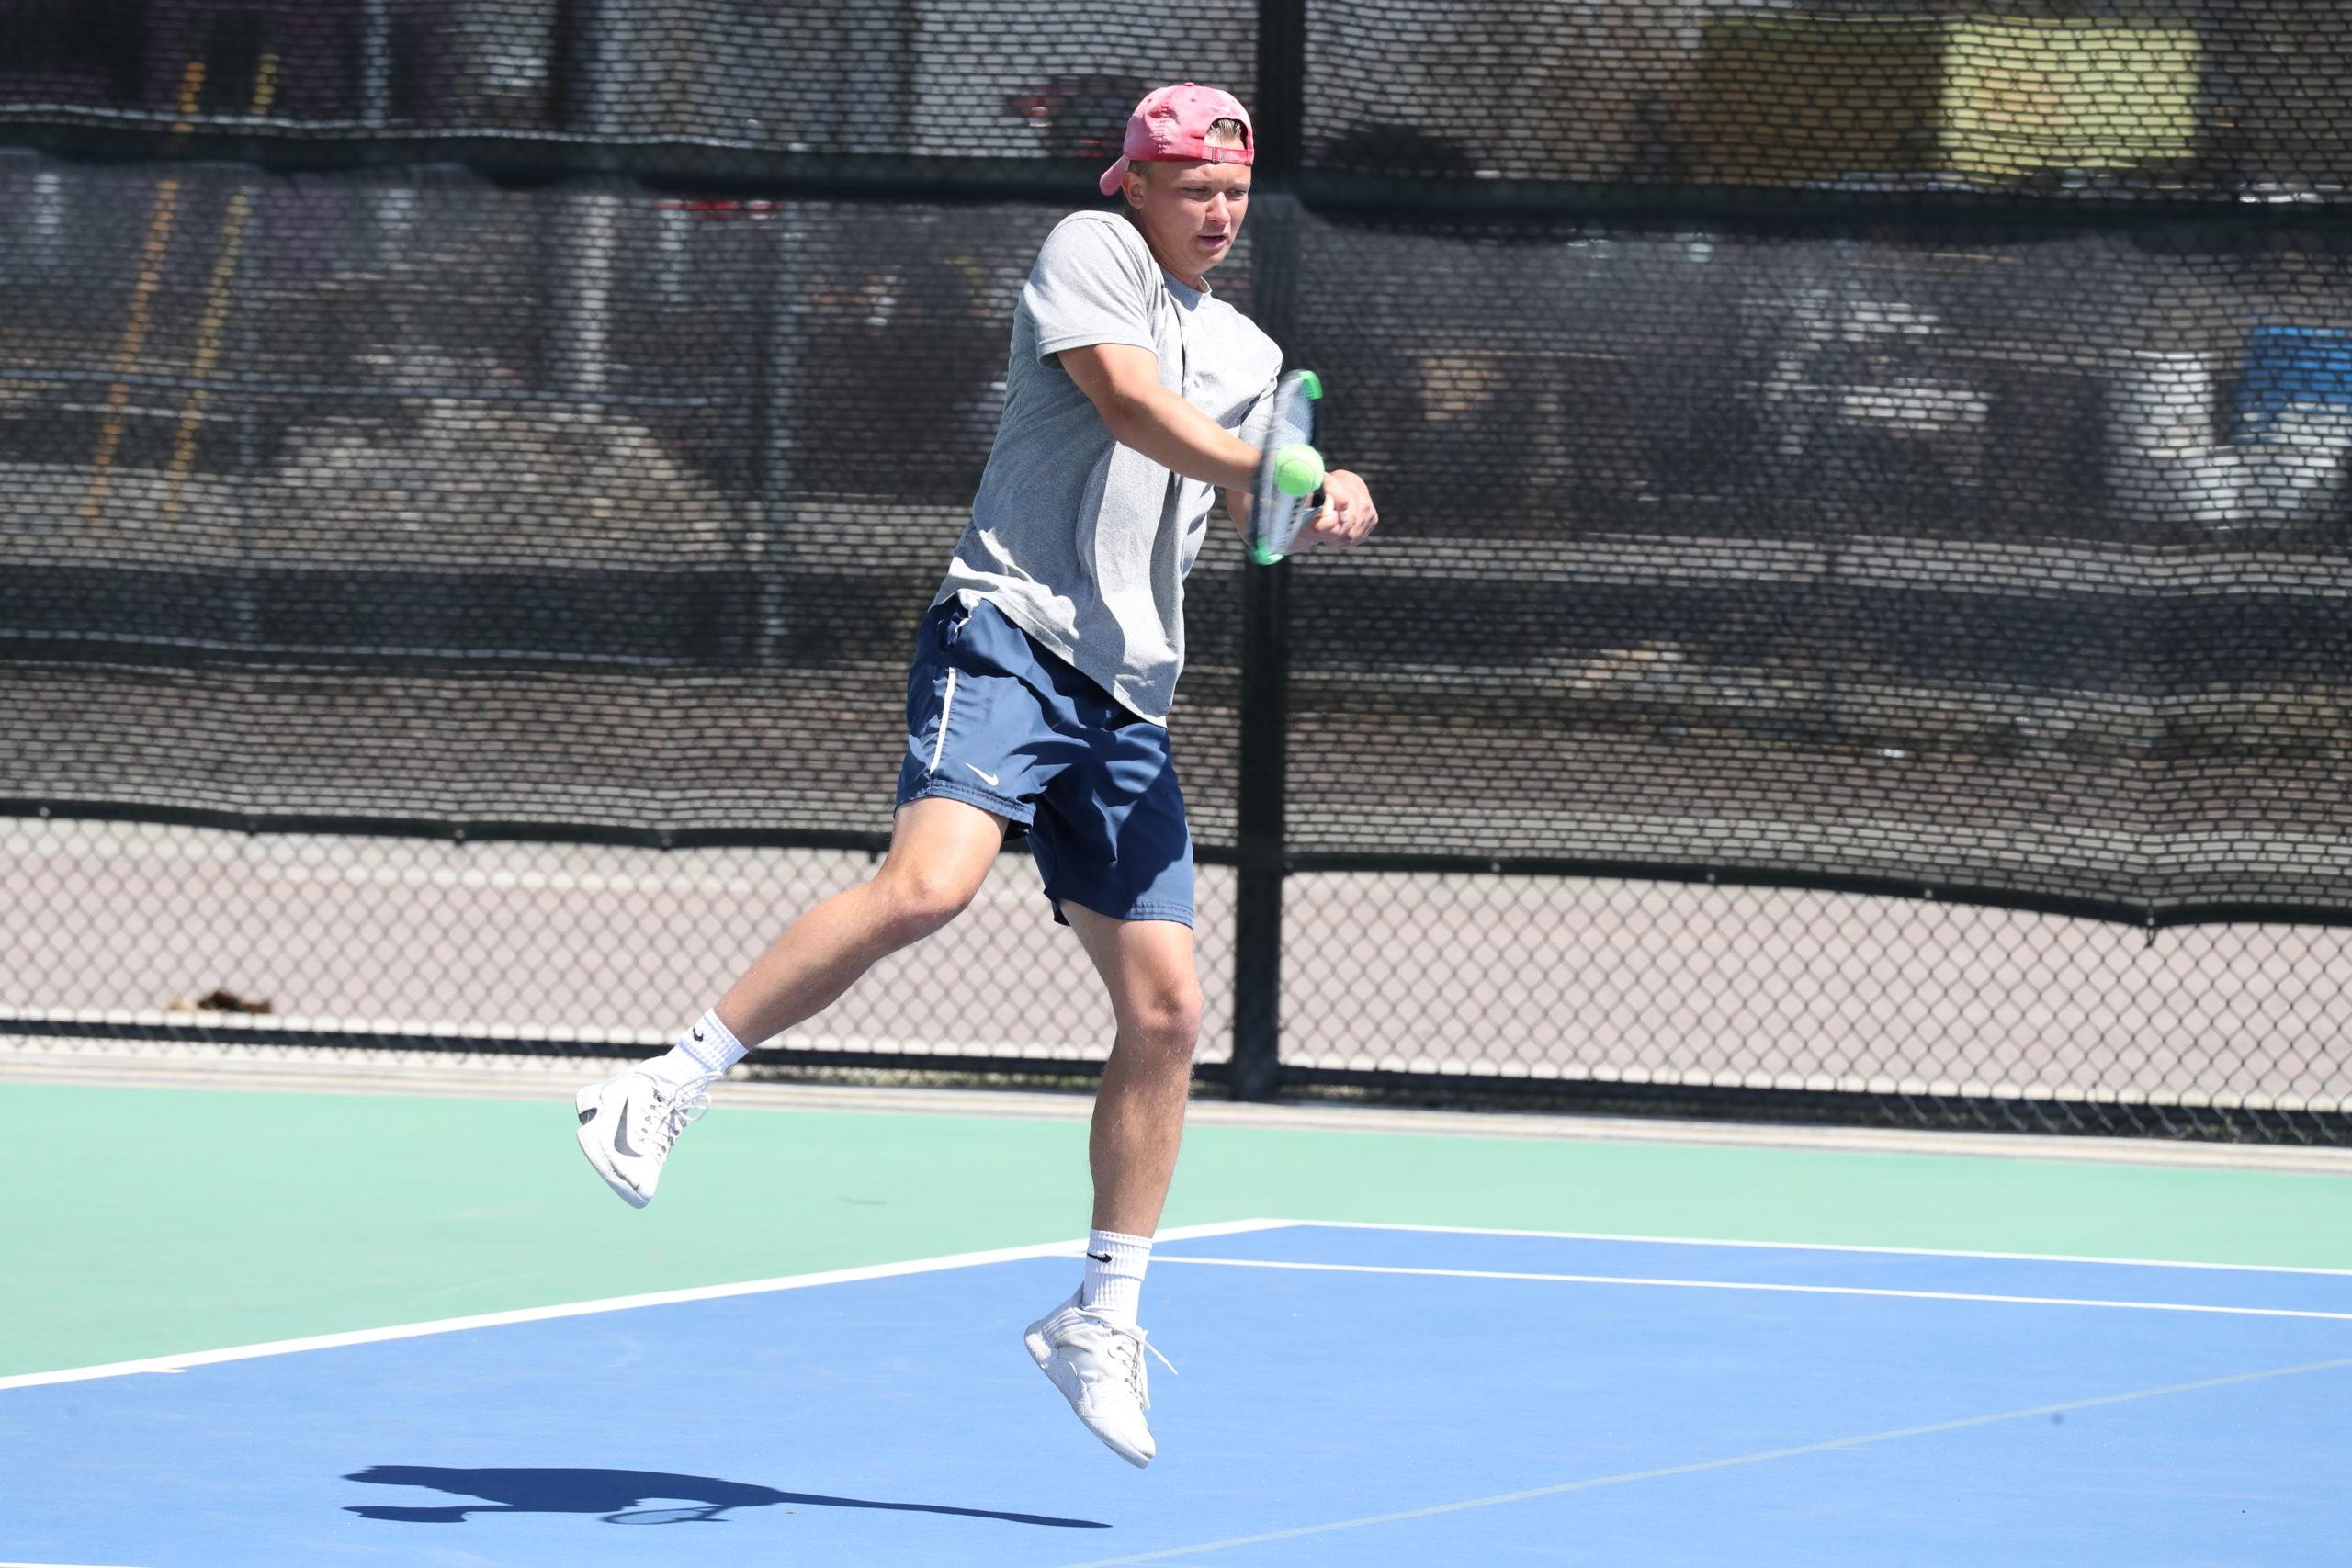 Men's tennis player David Kijak makes contact on a back-handed shot during a match in 2022.